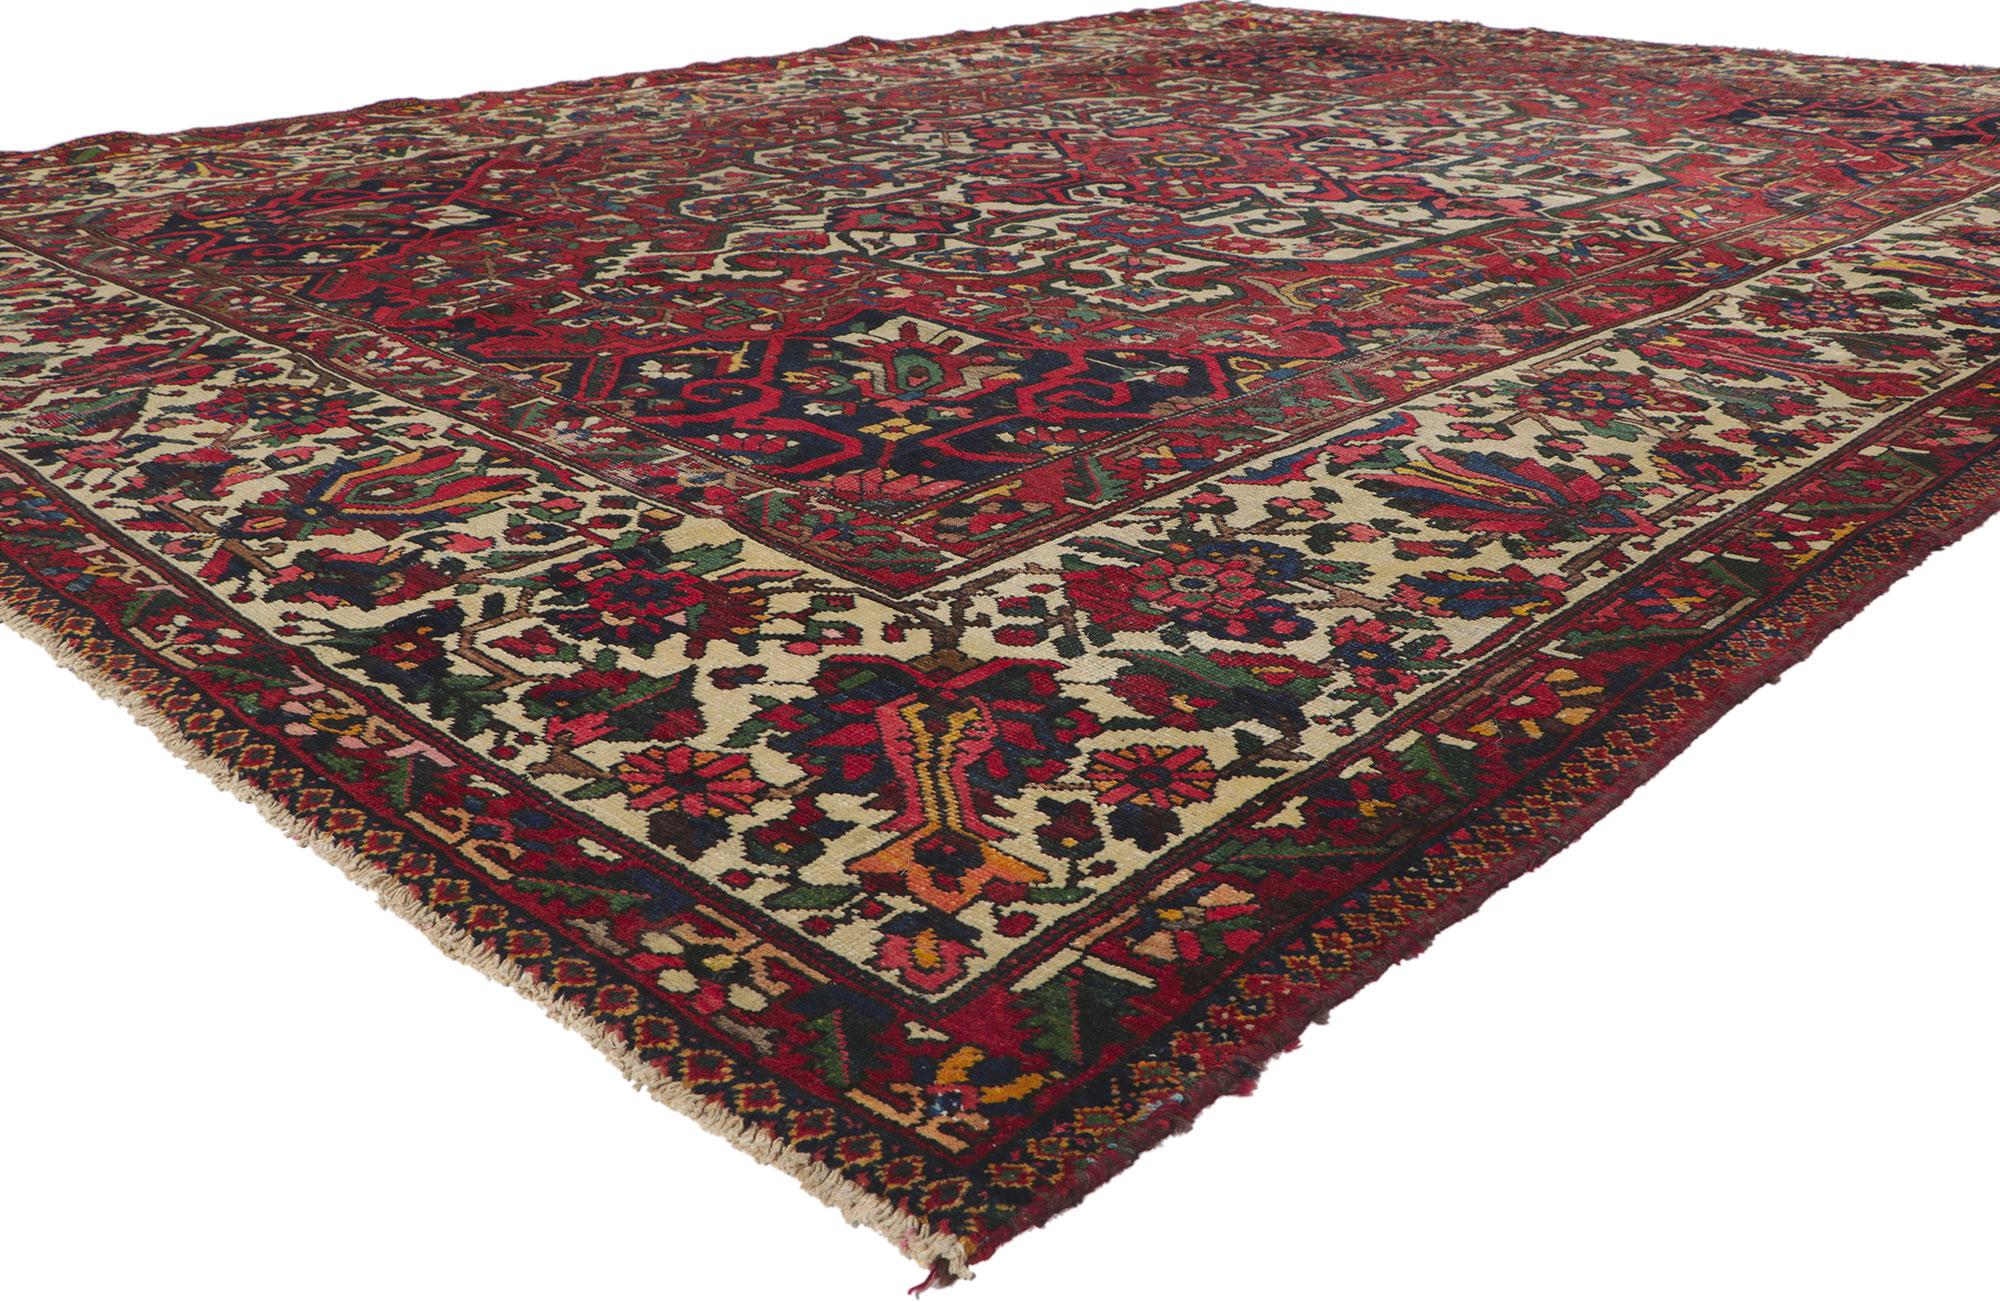 61194 Distressed antique Persian Bakhtiari rug, 10'07 x 13'09. With its effortless beauty and timeless appeal, this hand knotted wool antique Persian Bakhtiari rug can beautifully blend modern, contemporary, and traditional interiors. The